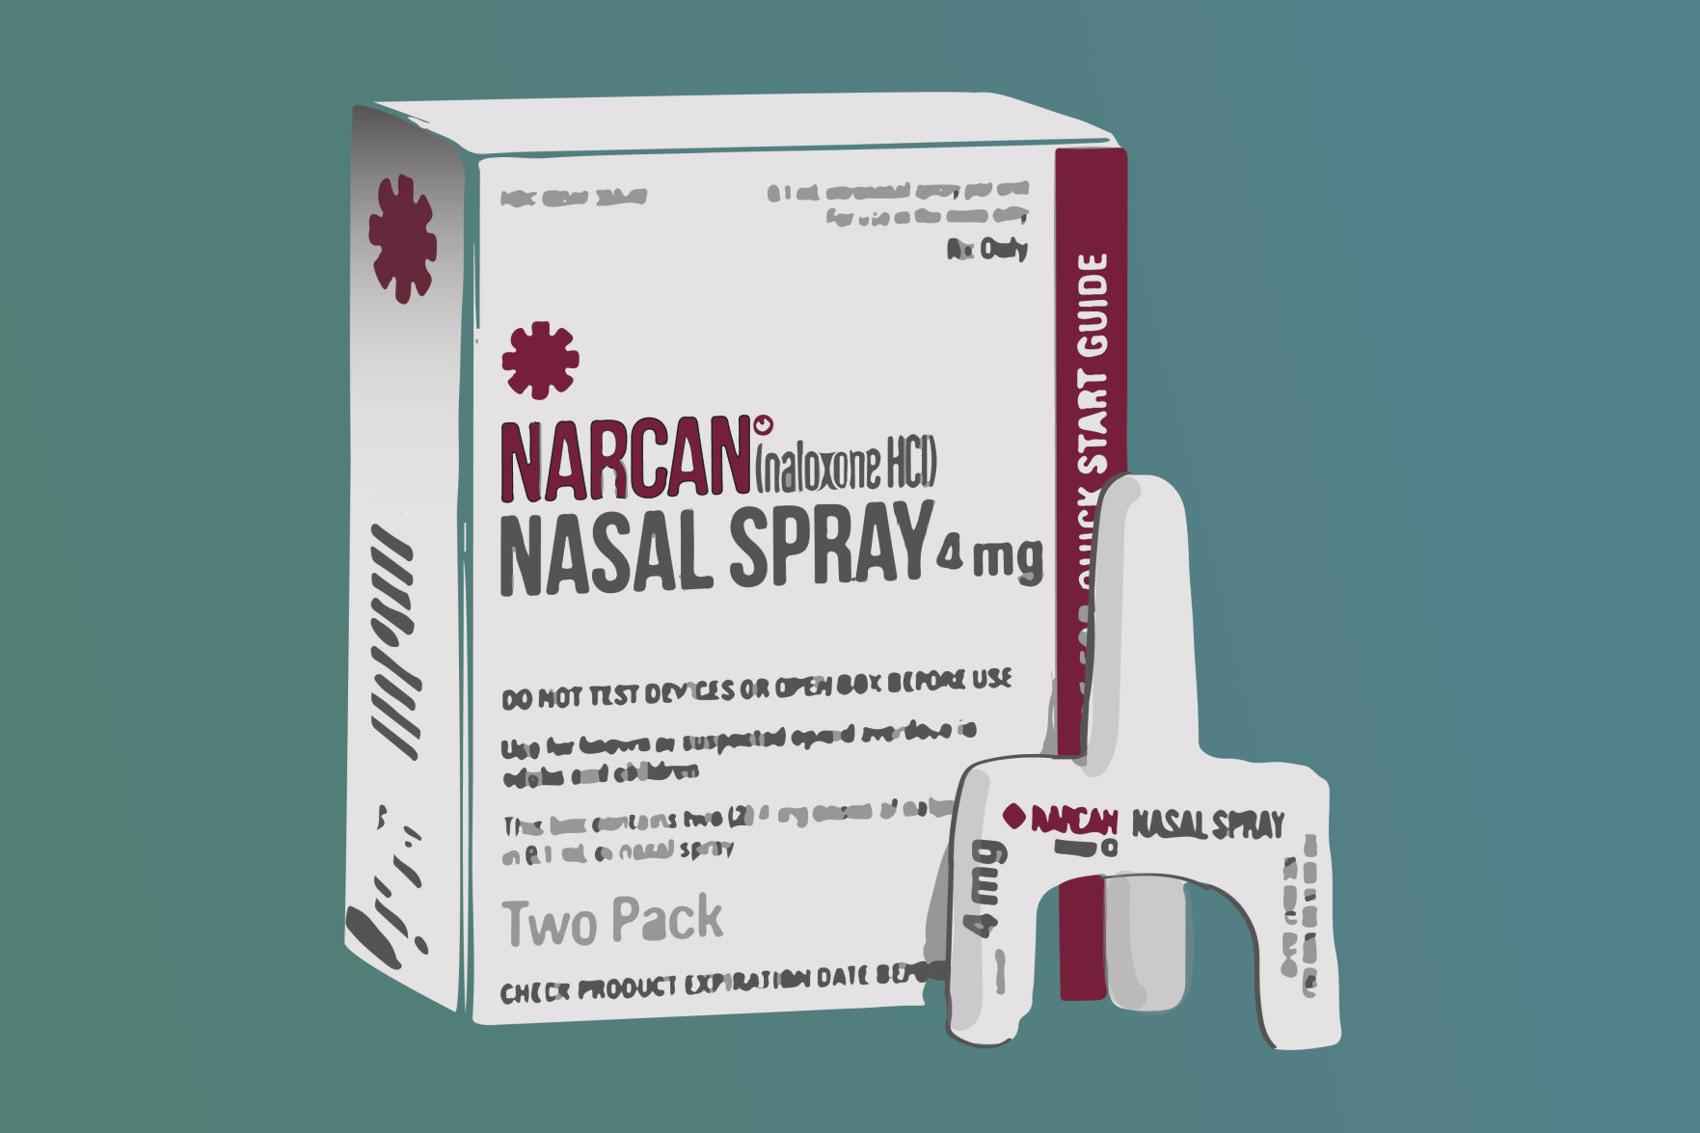 Graphic of Narcan nasal spray next to the box